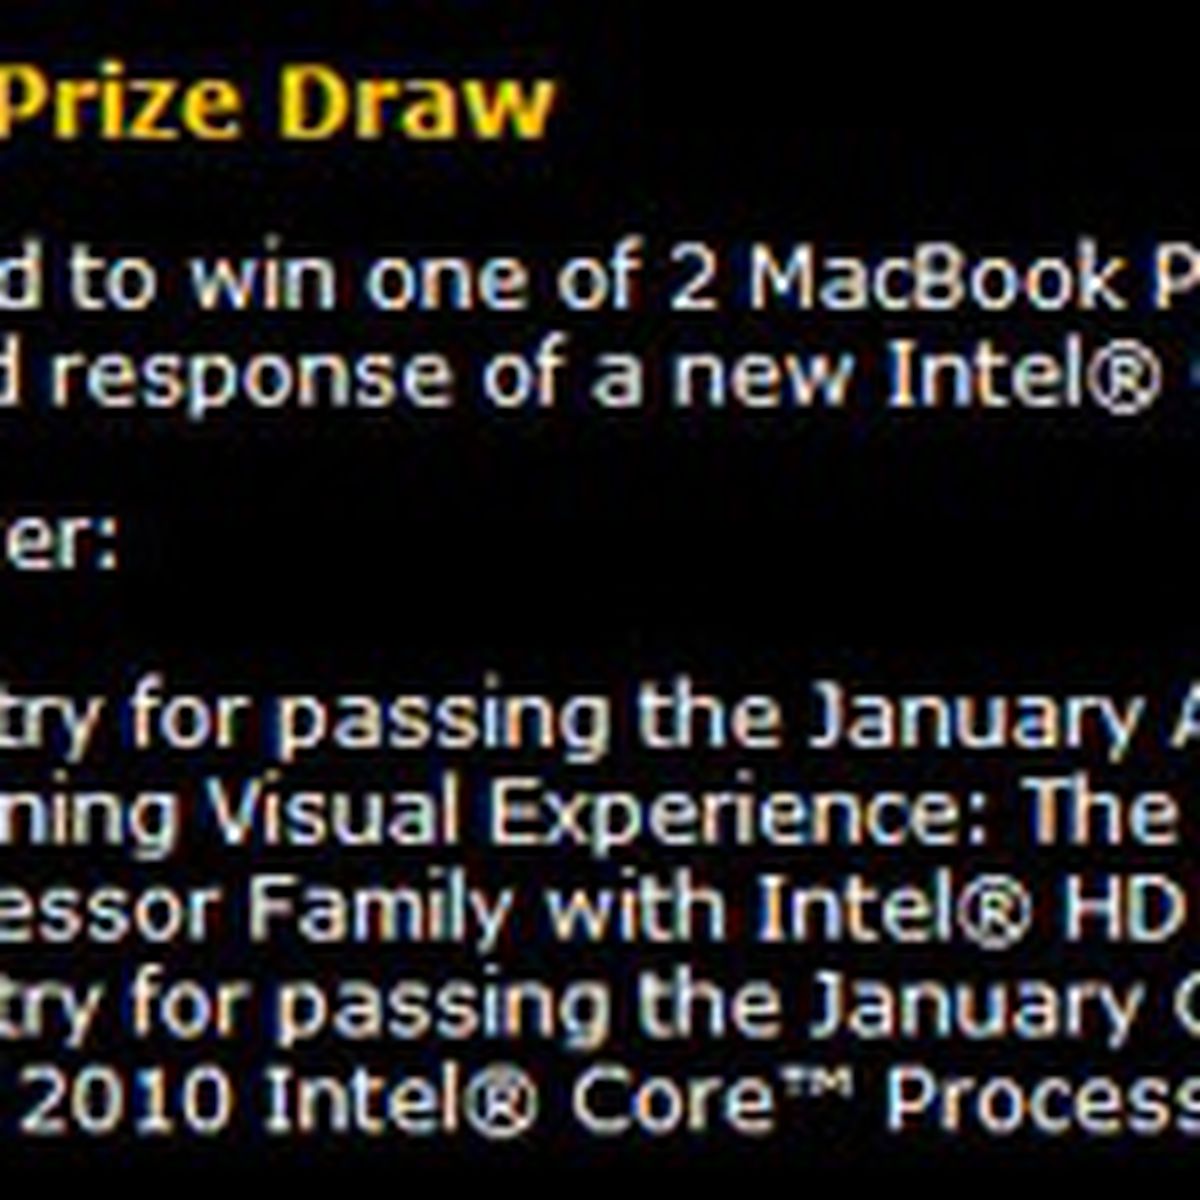 Intel Promotion Appears To Reveal Forthcoming Core I5 Based Macbook Pro Macrumors